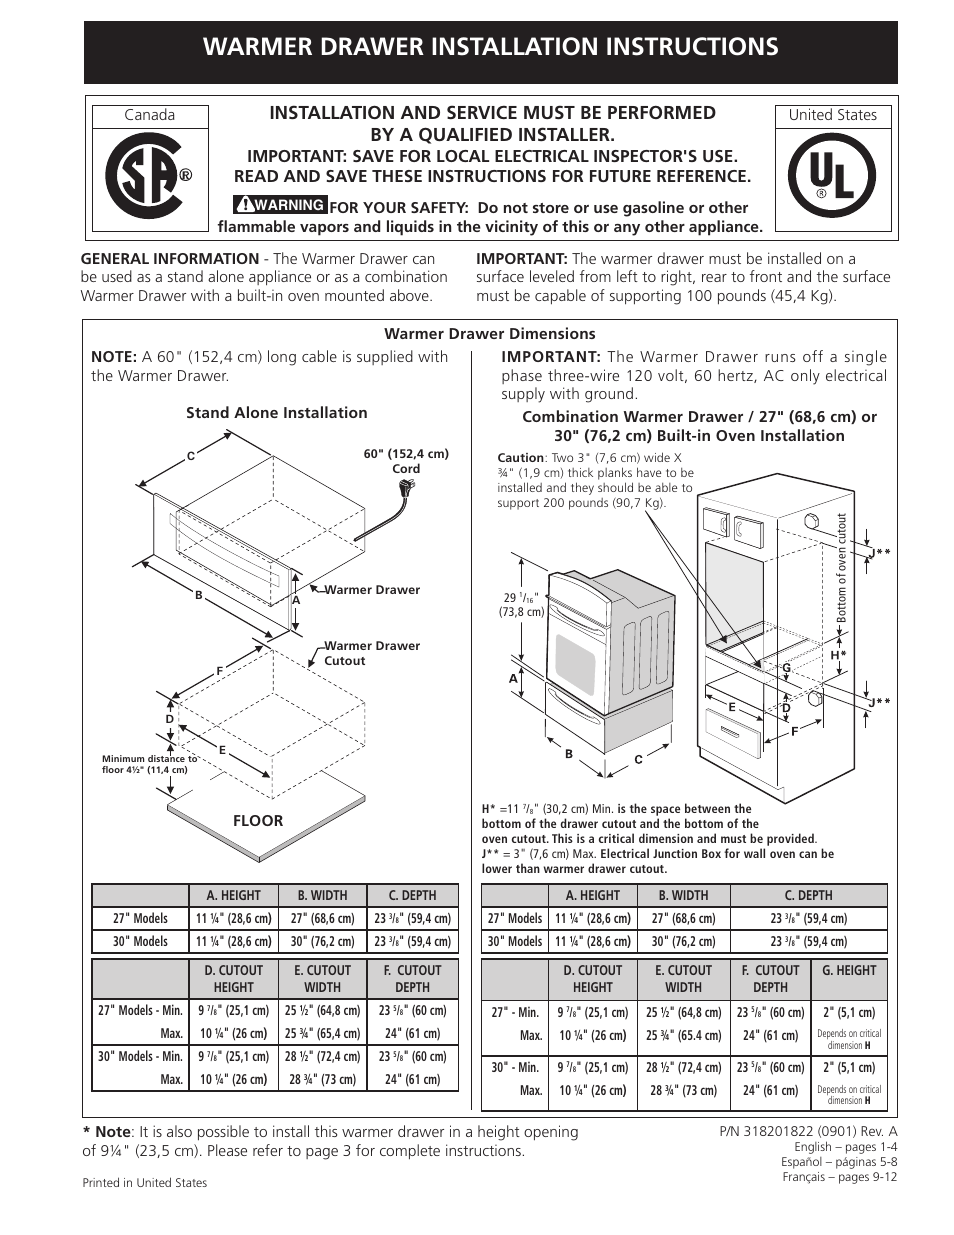 FRIGIDAIRE 318201822 User Manual | 12 pages